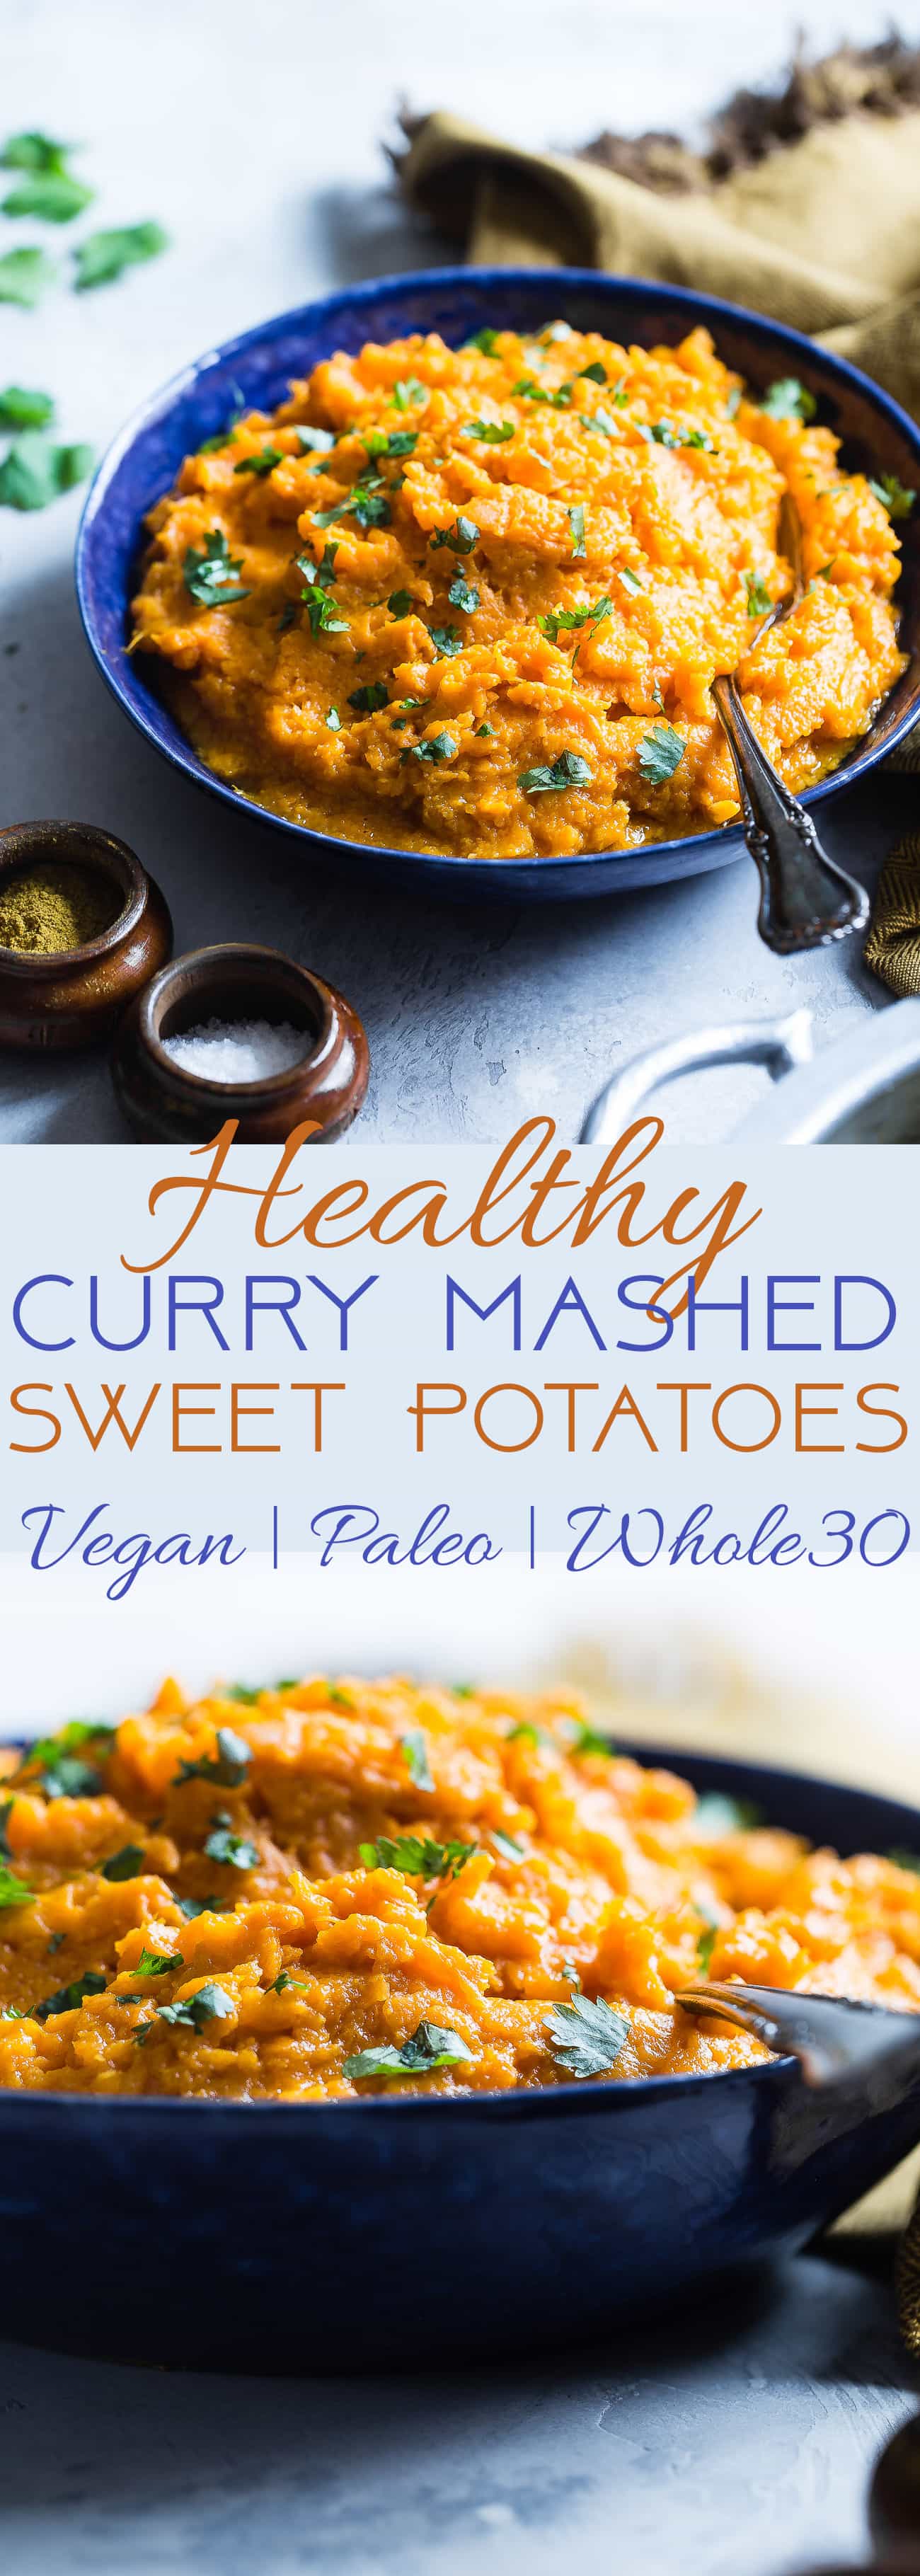 Coconut Curry Mashed Sweet Potatoes - A sweet and spicy spin on a holiday classic!  So creamy you will never believe they are dairy, grain and gluten free and paleo/vegan/whole30 compliant! | Foodfaithfitness.com | @FoodFaithFit | healthy mashed sweet potatoes. easy mashed sweet potatoes. healthy thanksgiving side dishes. vegan side dishes. paleo side dishes. whole30 side dishes. vegan mashed sweet potatoes. how to make mashed sweet potatoes. best mashed sweet potatoes. clean mashed sweet potatoes. whole30 mashed sweet potatoes.